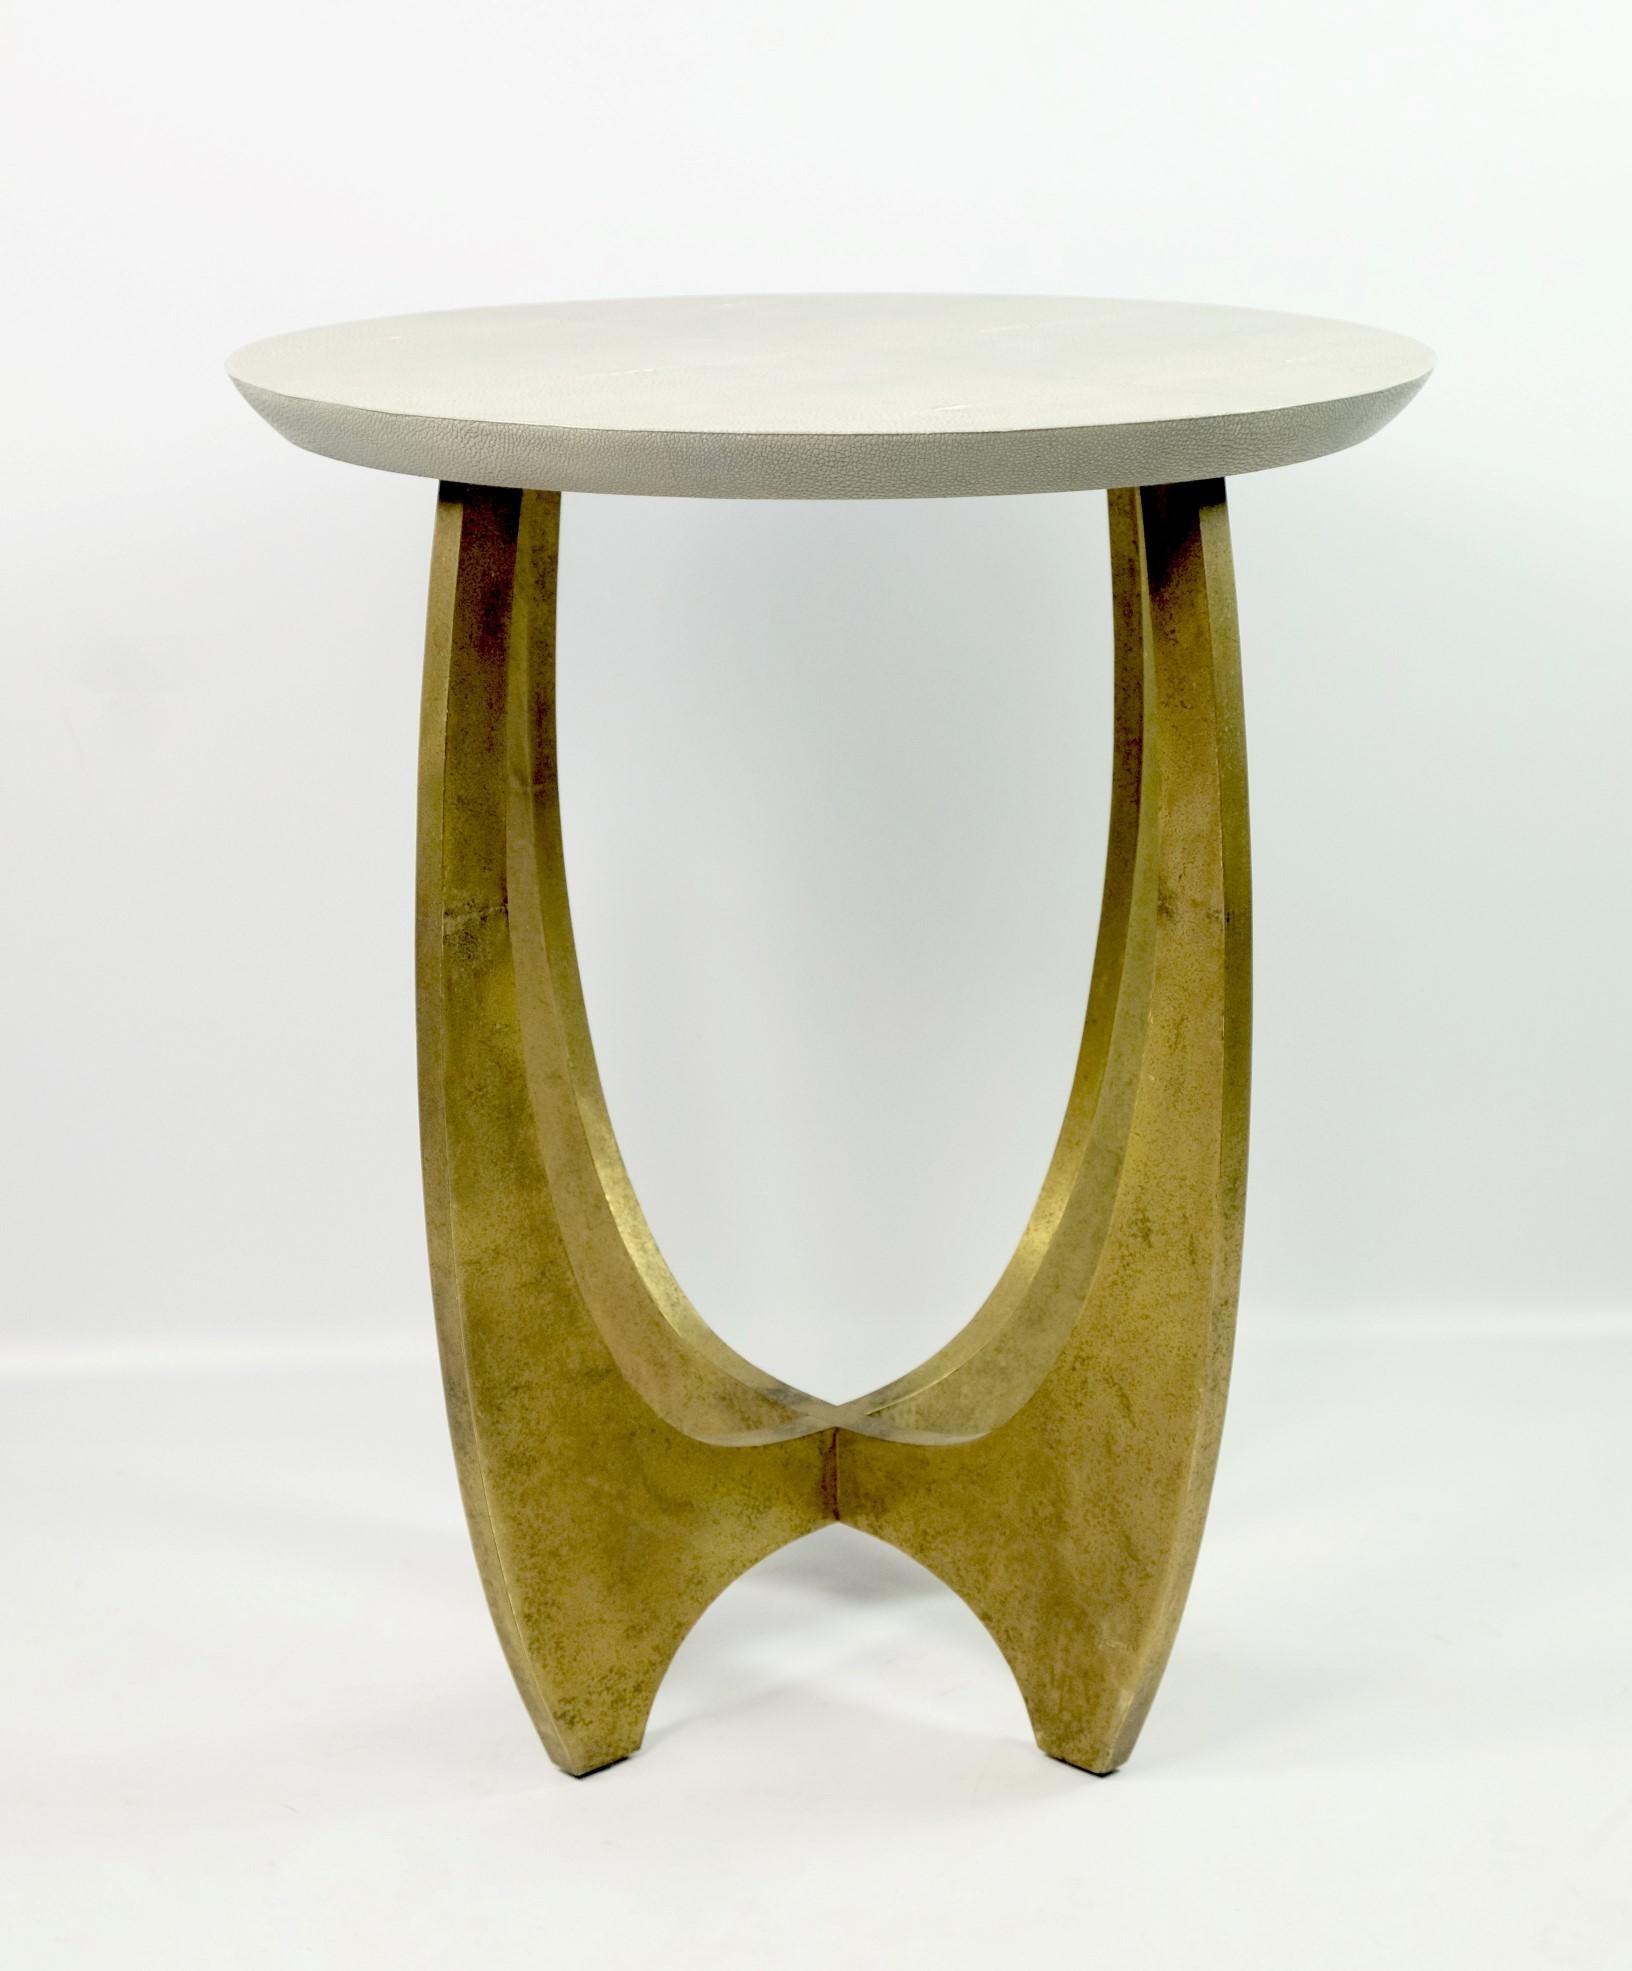 This gueridon table is made of textured brass with a round shagreen top.
The brass has been hammered by hand to give an irregular and artistic finish aspect.
The light grey color of the shagreen contrasts slightly with the brass base, which makes